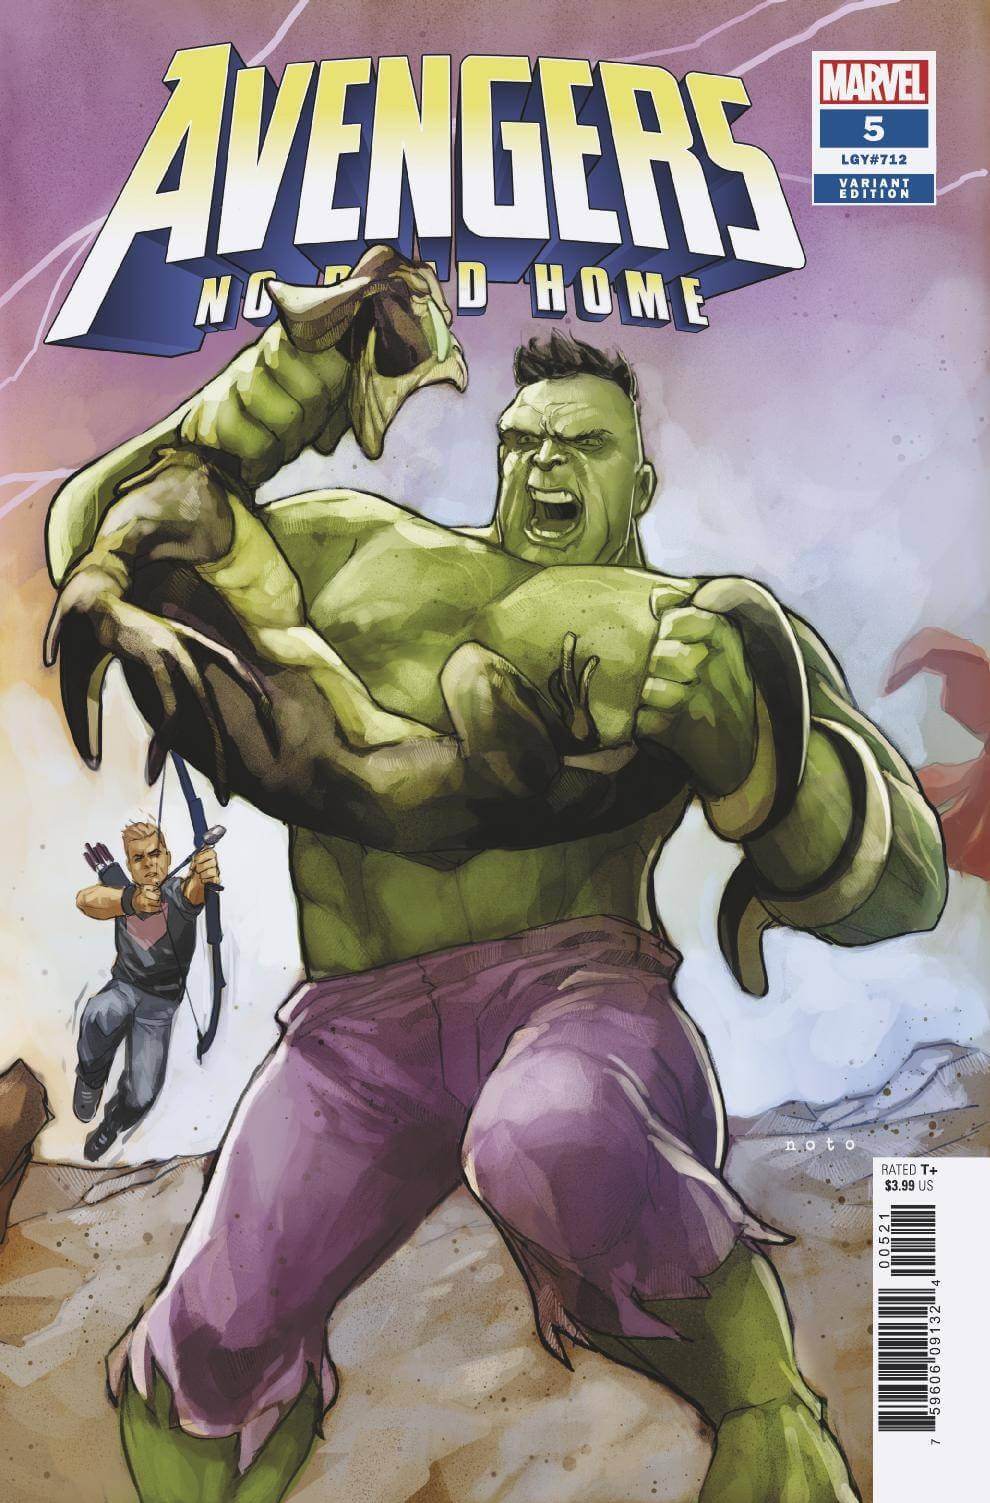 AVENGERS NO ROAD HOME Mico Suayan Phil Noto Connecting Variant Set 1 2 3 4 5 6 7 8 9 10 (04/2019) Marvel